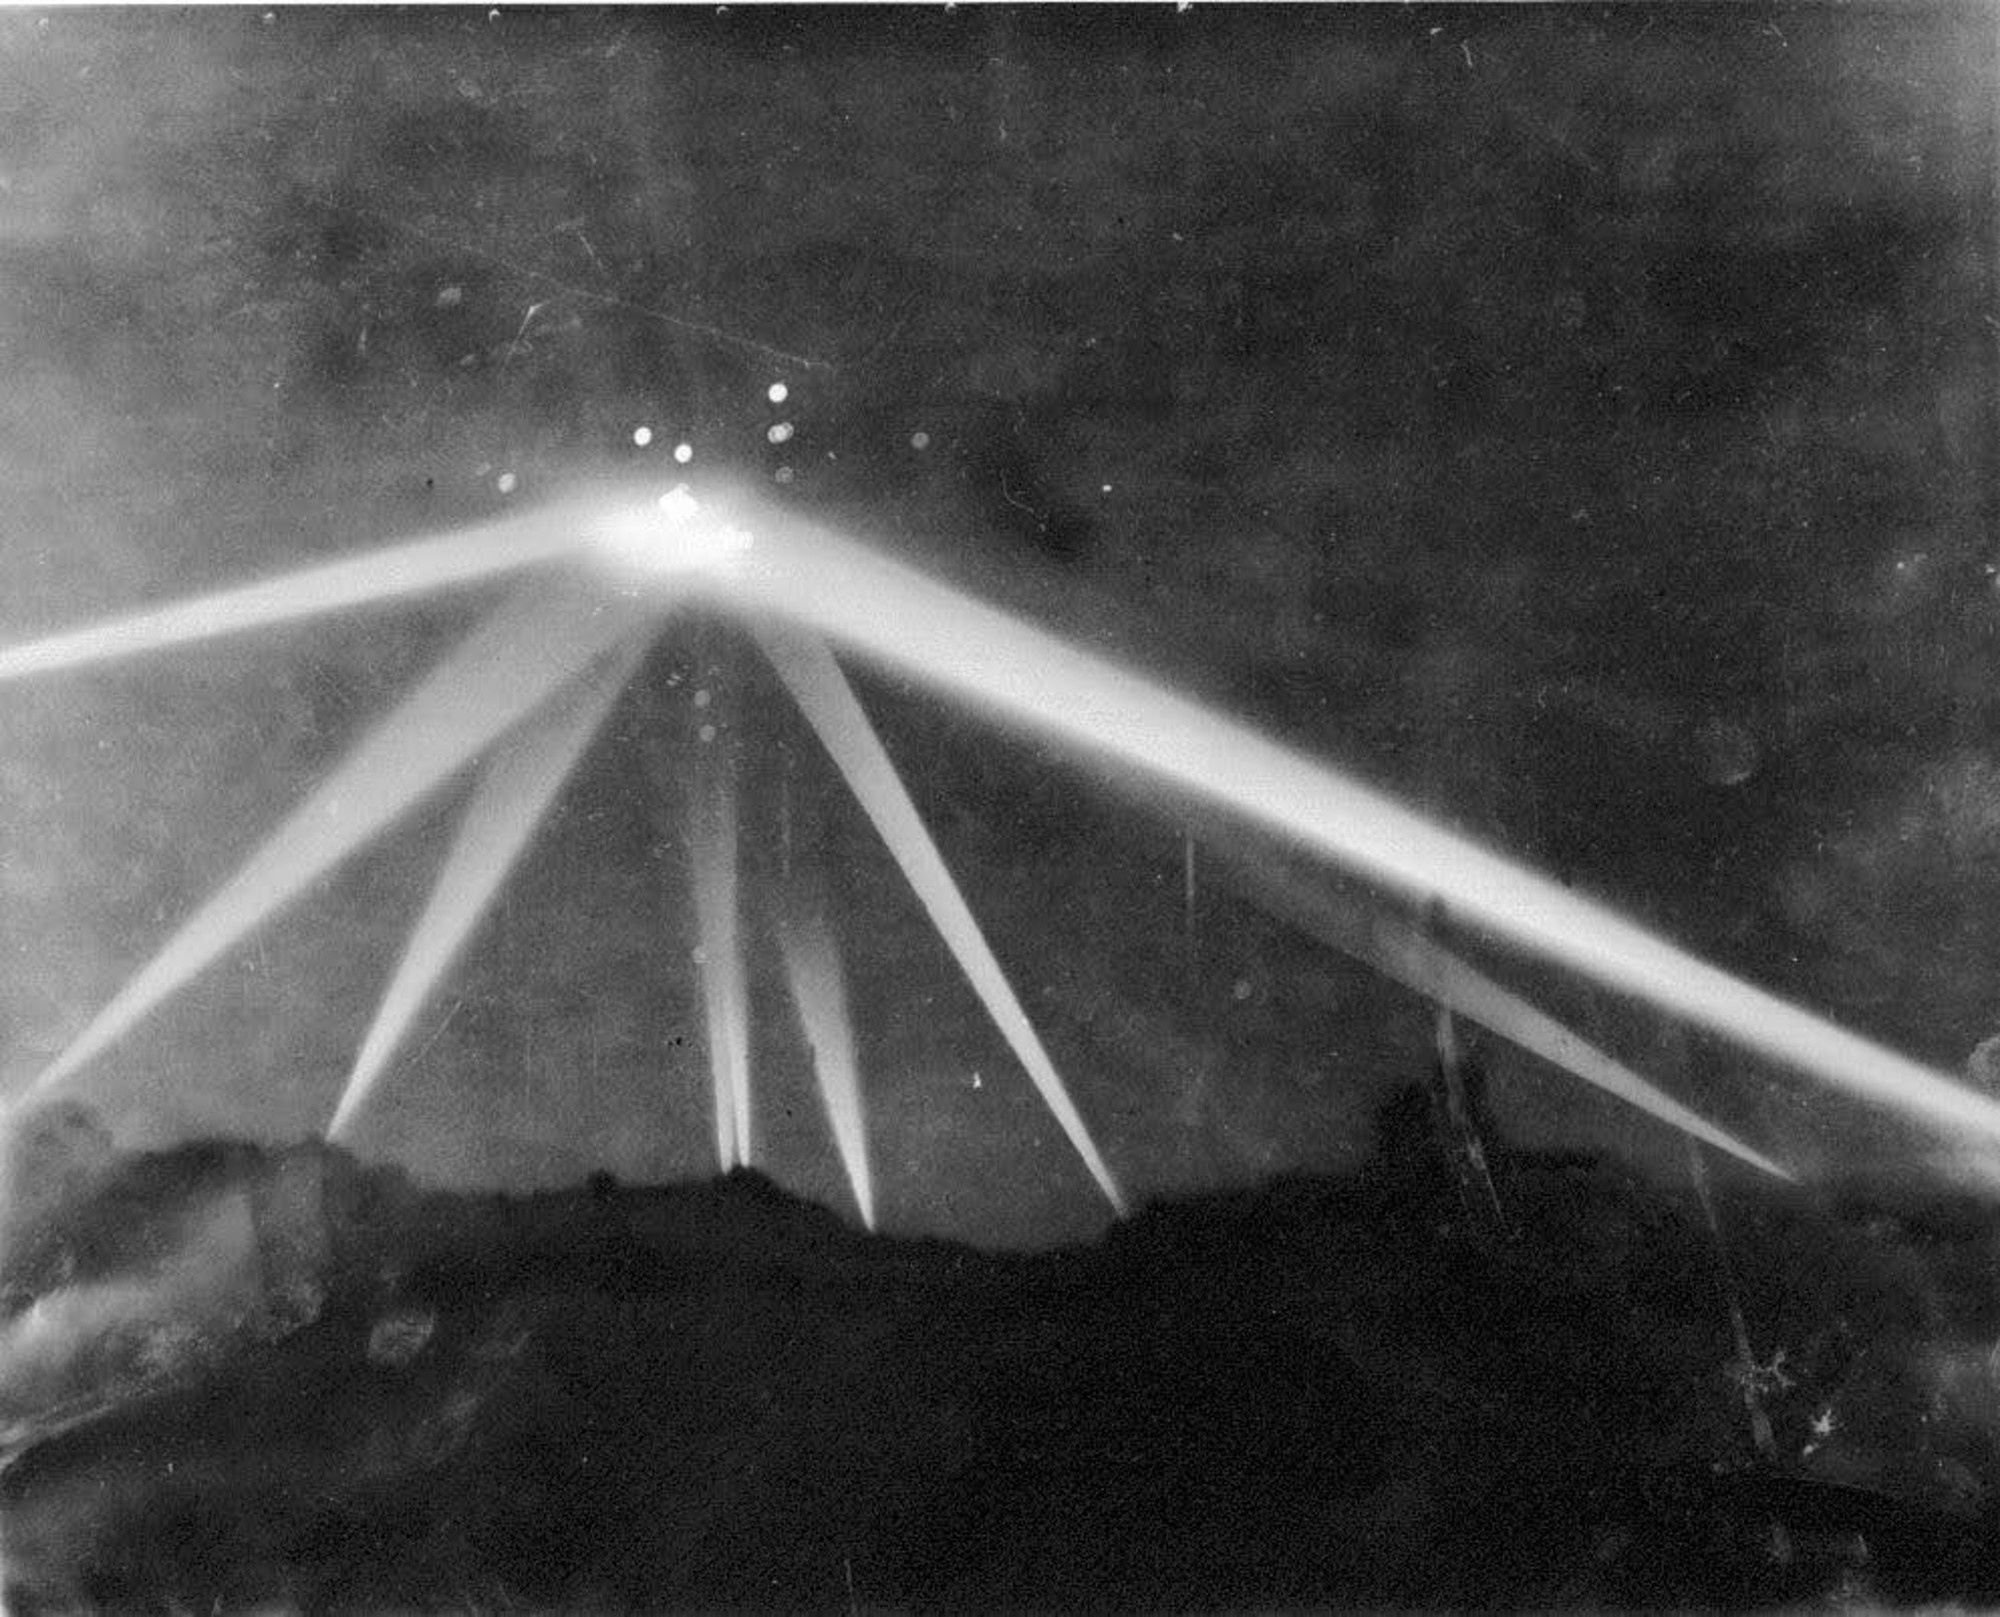 A scene from the Battle of Los Angeles, known as one of the most mysterious incidents of World War II and the source of much UFO lore.